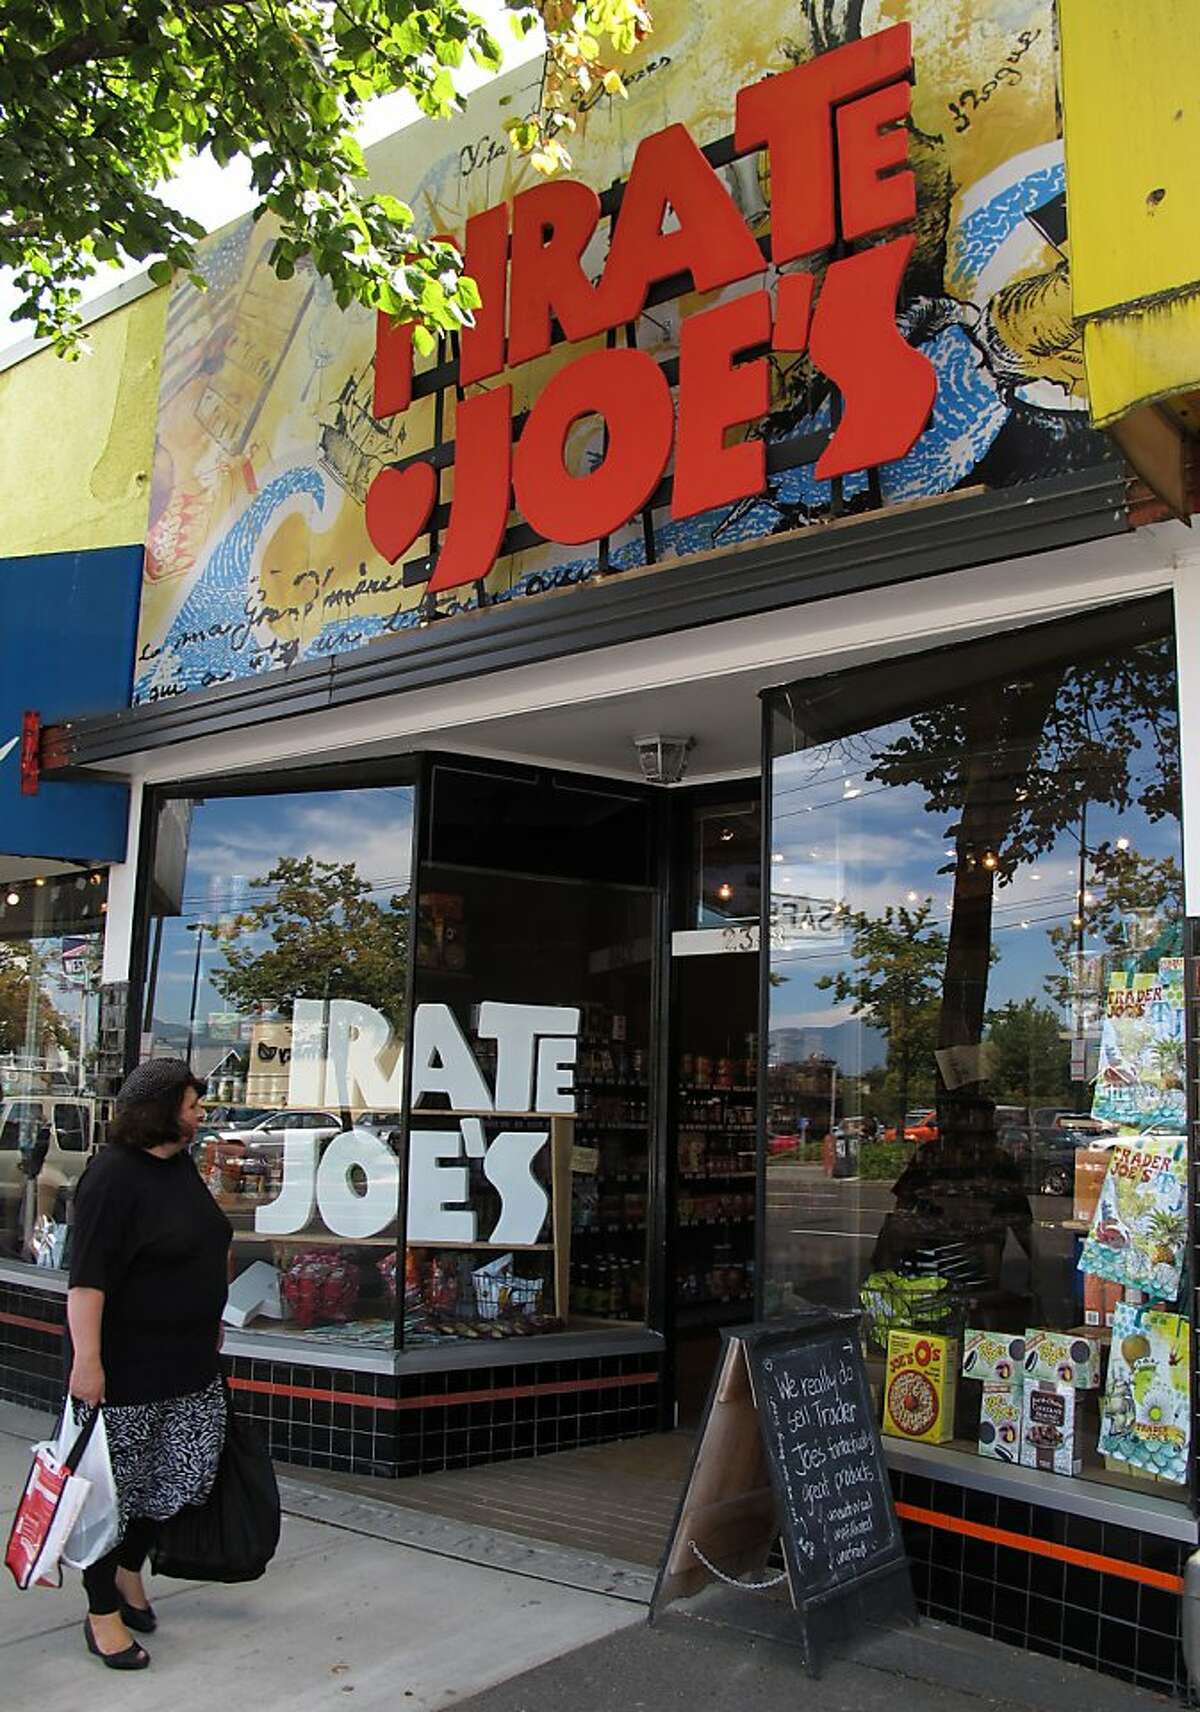 A shopper walks past the Pirate Joe's market in the Kitsilano neighborhood of Vancouver, B.C. on Wednesday, July 24, 2013. Mike Hallatt opened the shop, which resells Trader Joe's products, in 2012 and is now being sued by California-based Trader Joe's. Hallatt makes frequent trips to the United States to stock up on product during shopping sprees at Trader Joe's despite having his photo posted at most locations in Washington state.